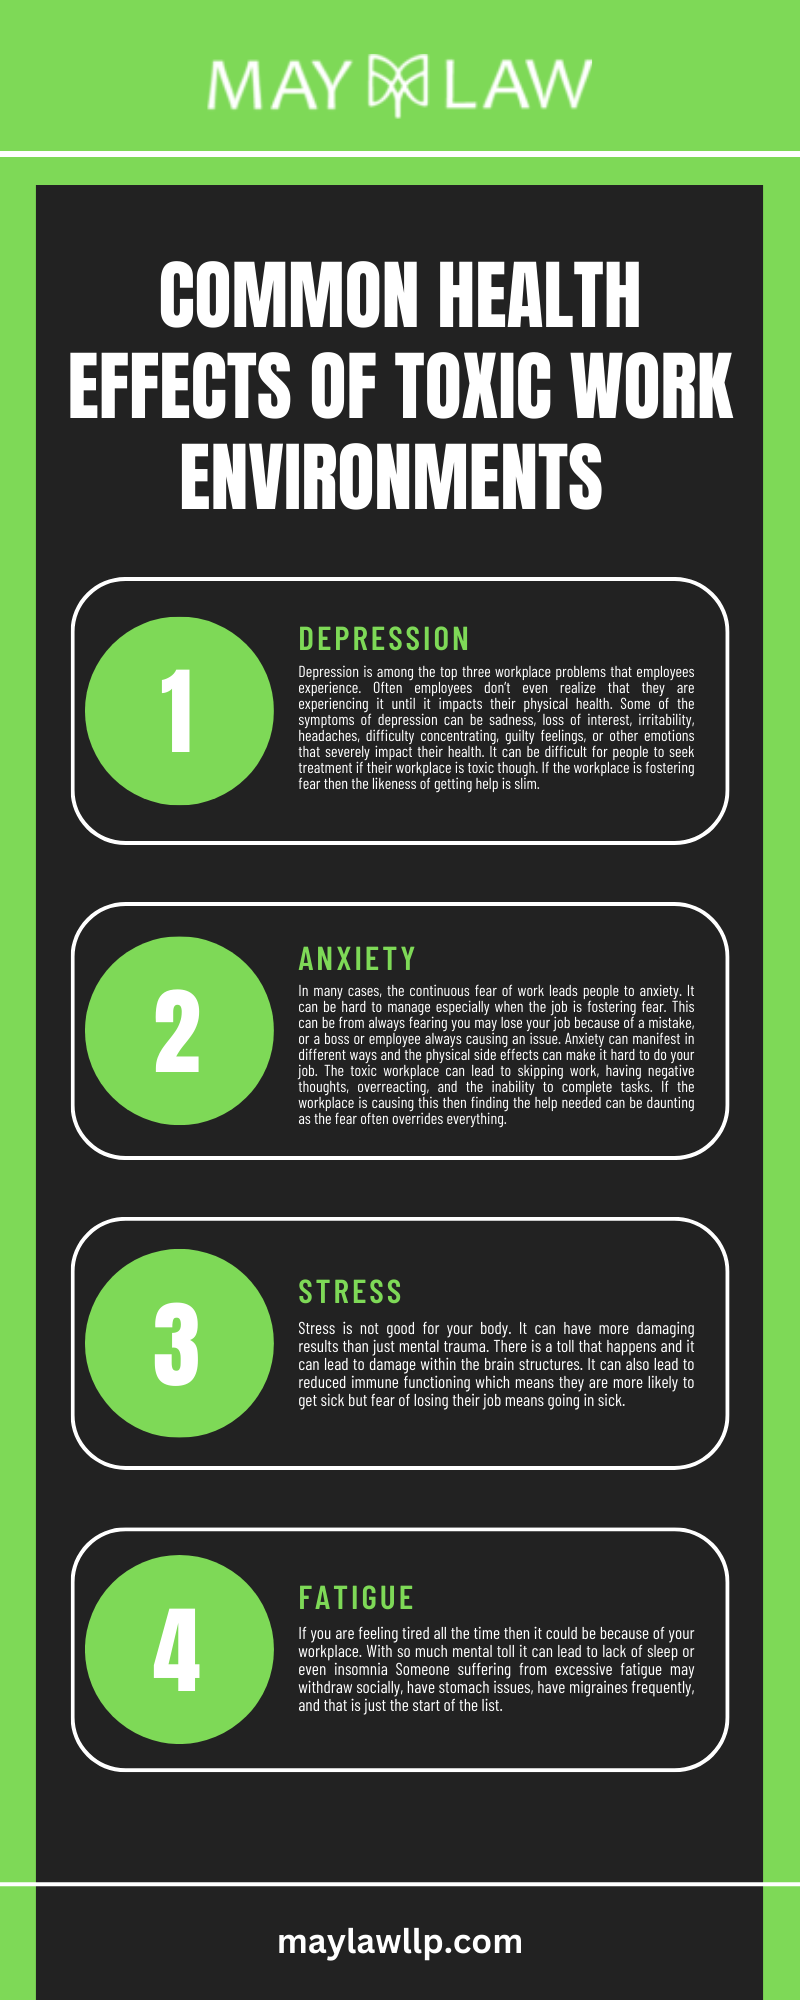 COMMON HEALTH EFFECTS OF TOXIC WORK ENVIRONMENTS INFOGRAPHIC